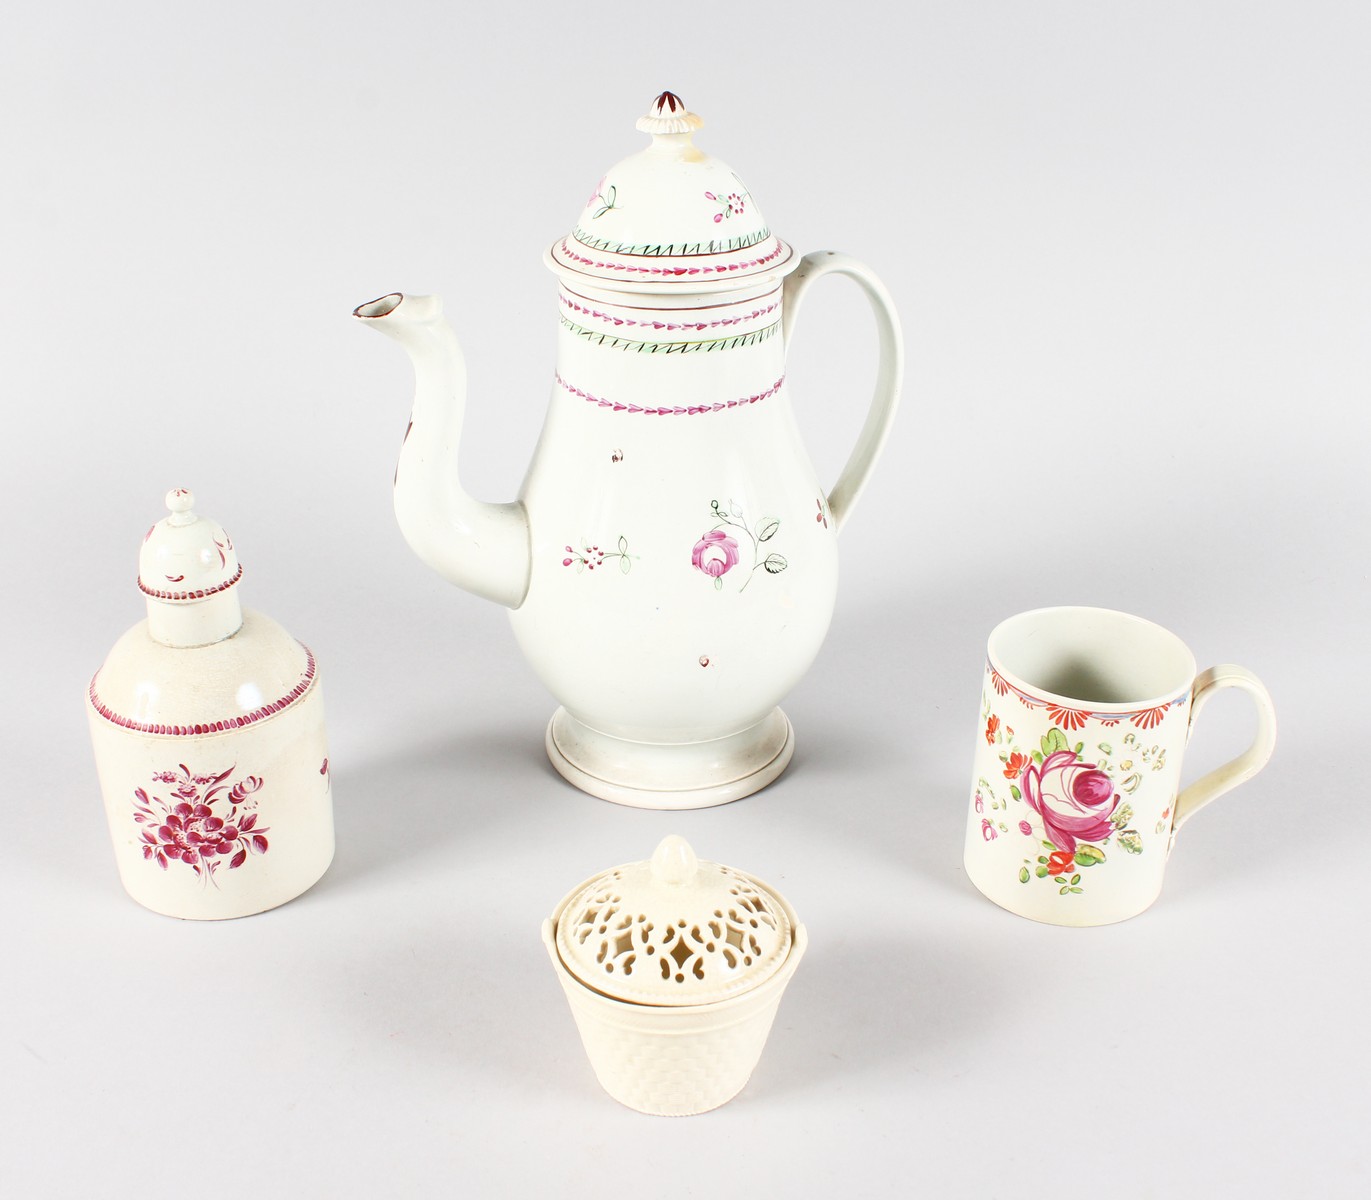 A LATE 18TH/EARLY 19TH CENTURY PEALWARE COFFEE POT AND COVER, a pearlware tea canister and cover